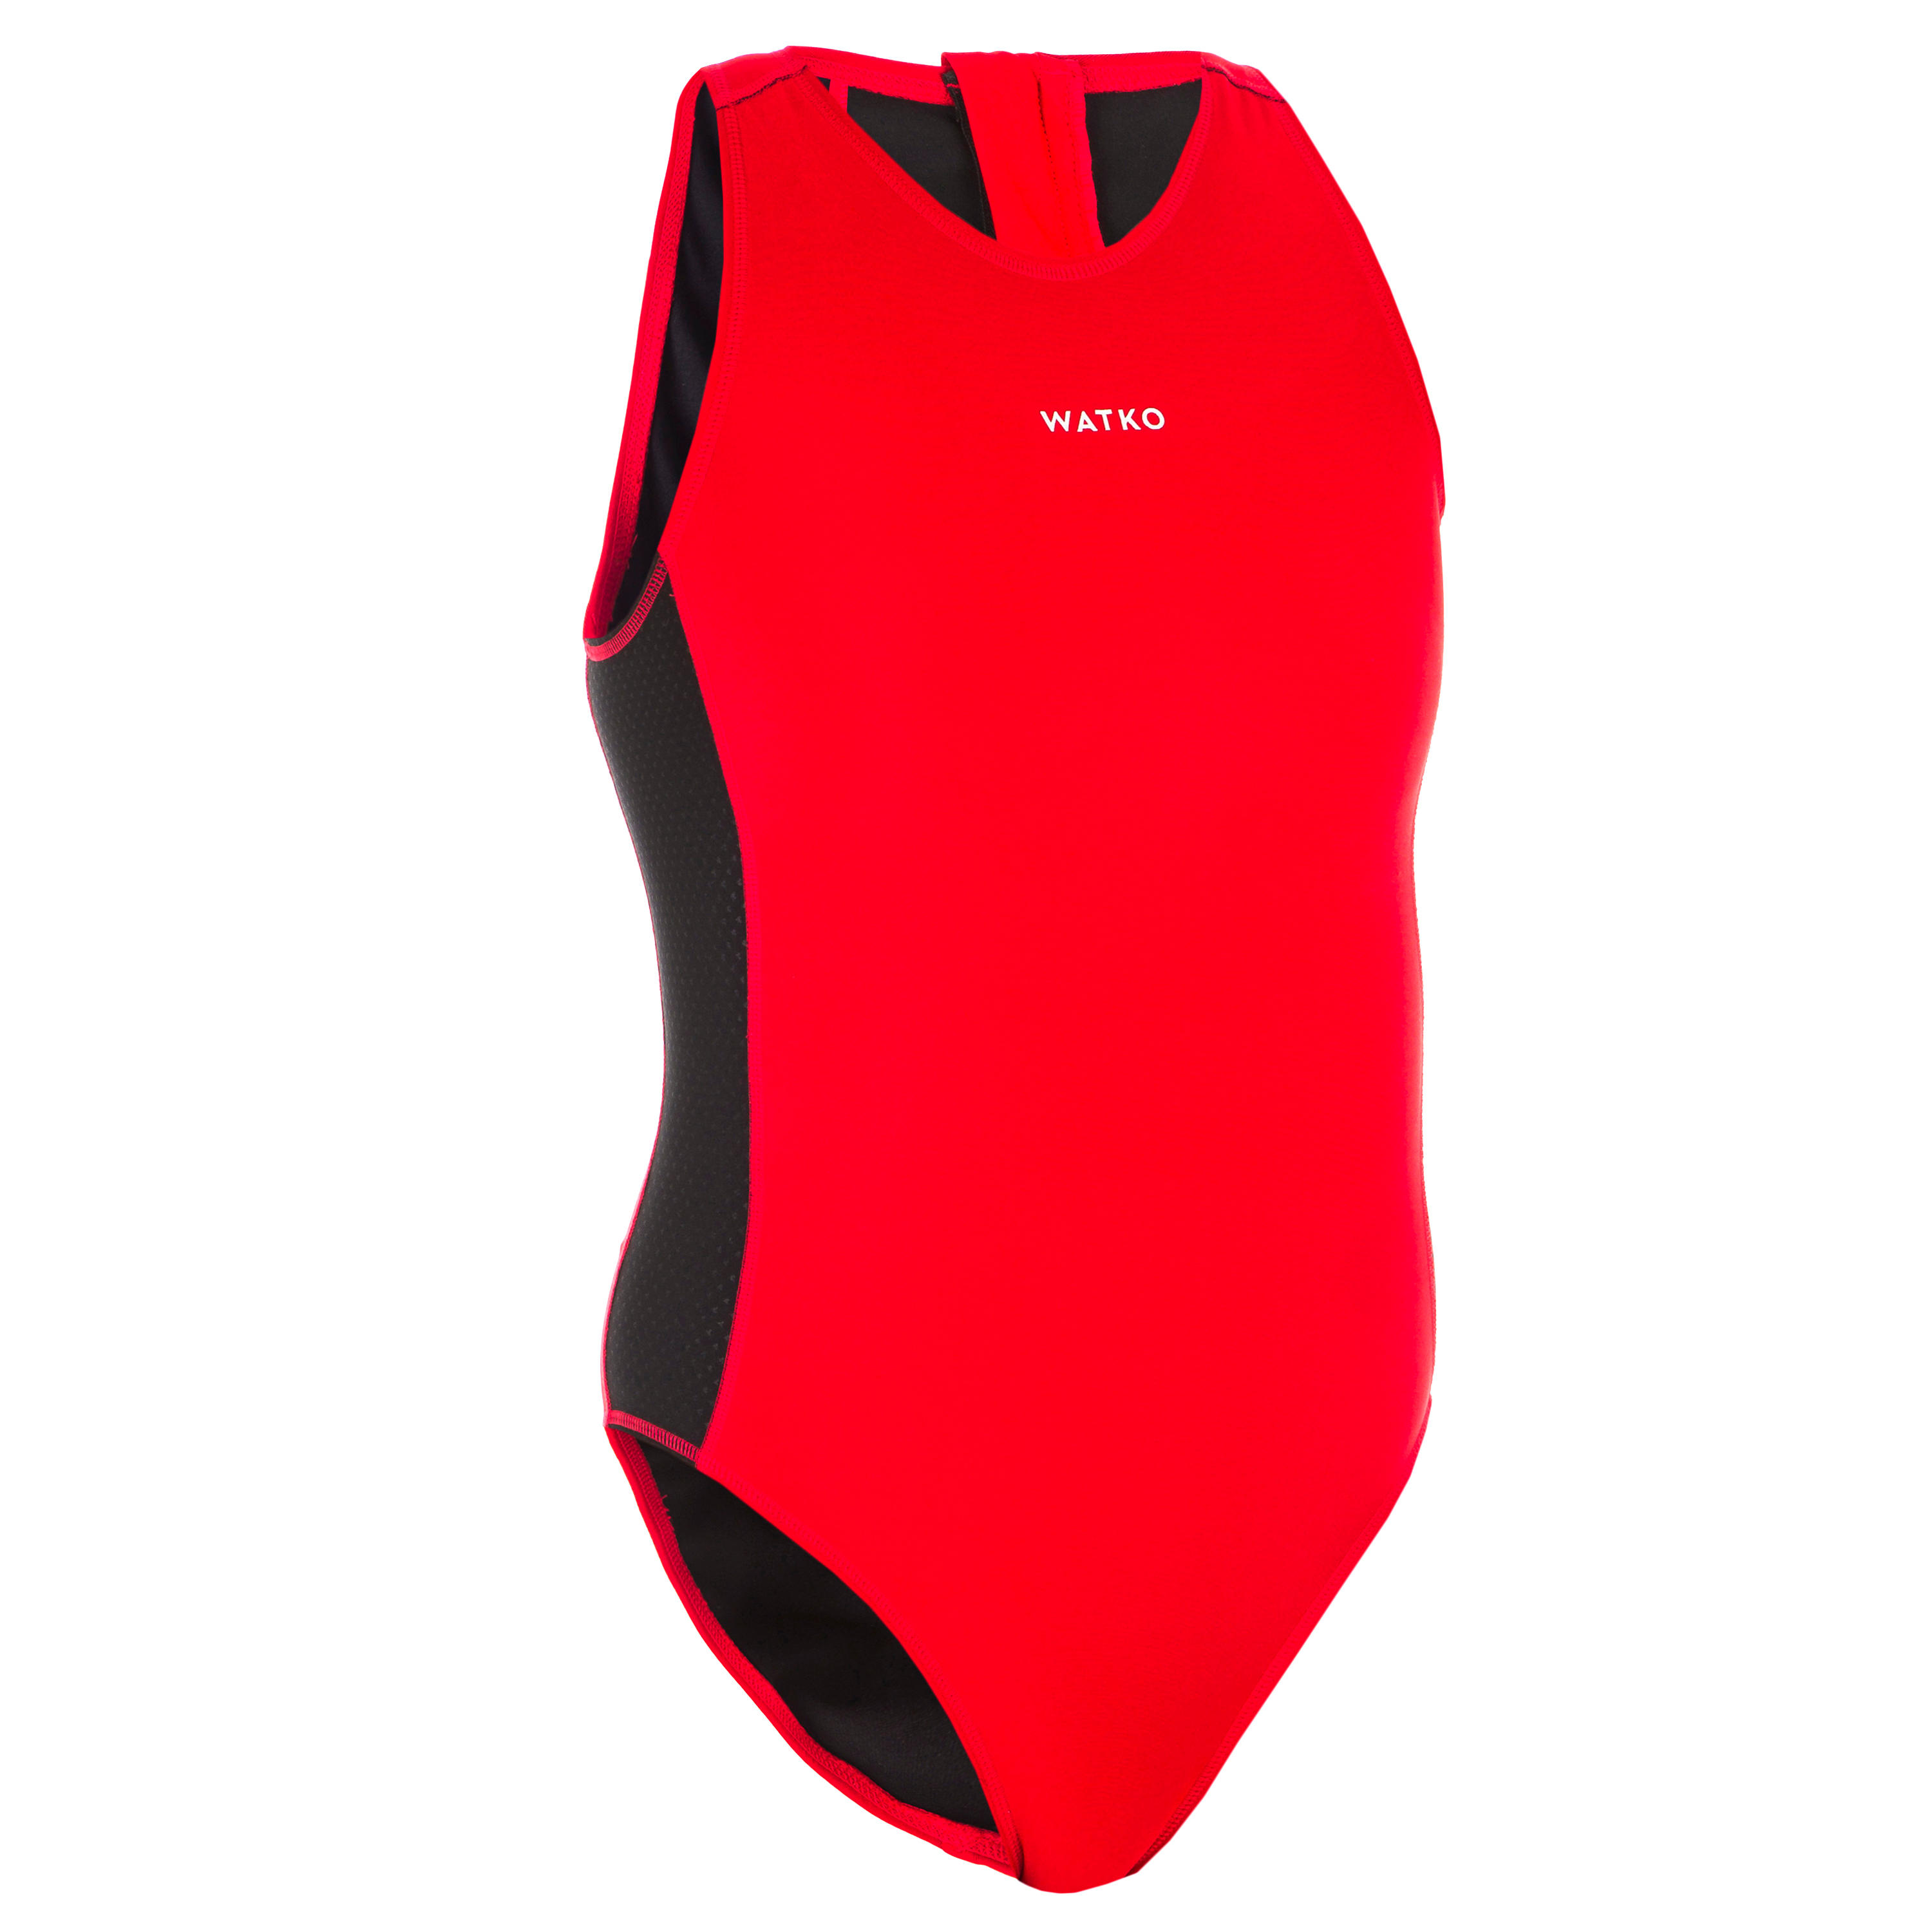 WOMEN'S ONE-PIECE WATER POLO SWIMSUIT - PLAIN RED 1/7